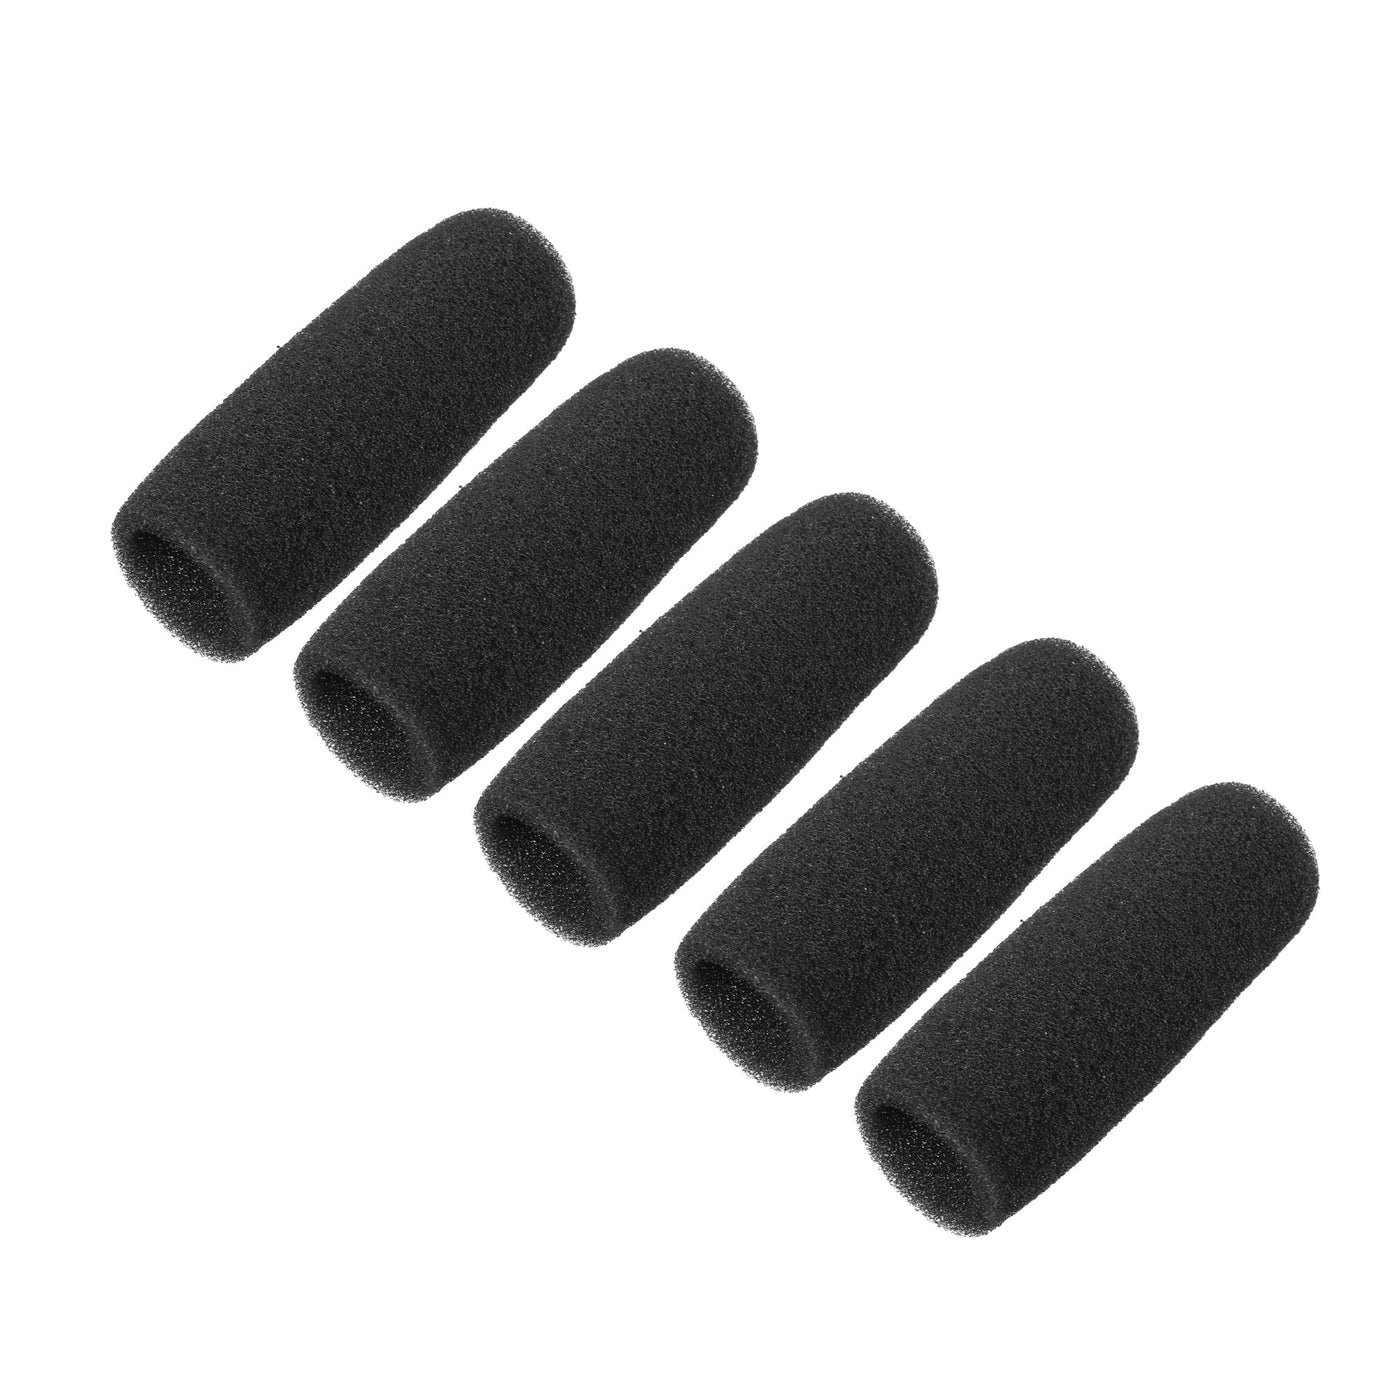 uxcell Uxcell 20PCS Sponge Foam Mic Cover Conference Microphone Windscreen Shield Protection Black 72mm Long